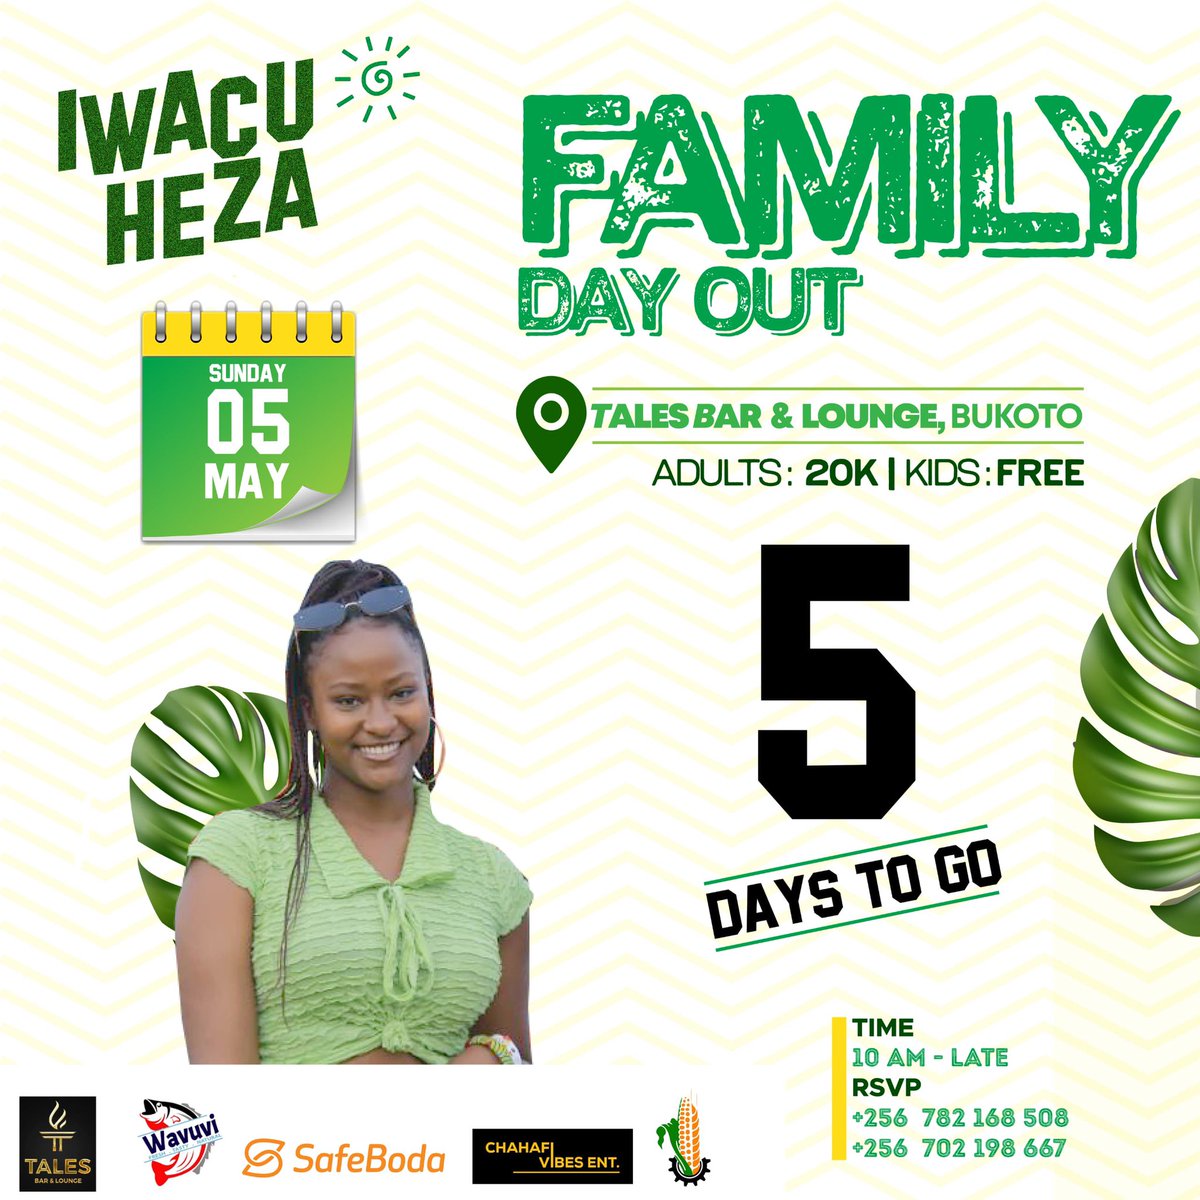 We’re counting down to 5 days to the #FamilyDayOut  🤗

Don’t miss out on the fun and don’t forget that all tickets will be accessible at the gate 😇

📍Tales Lounge Bukoto 

#IwacuHeza
 #TweseTuribamwe